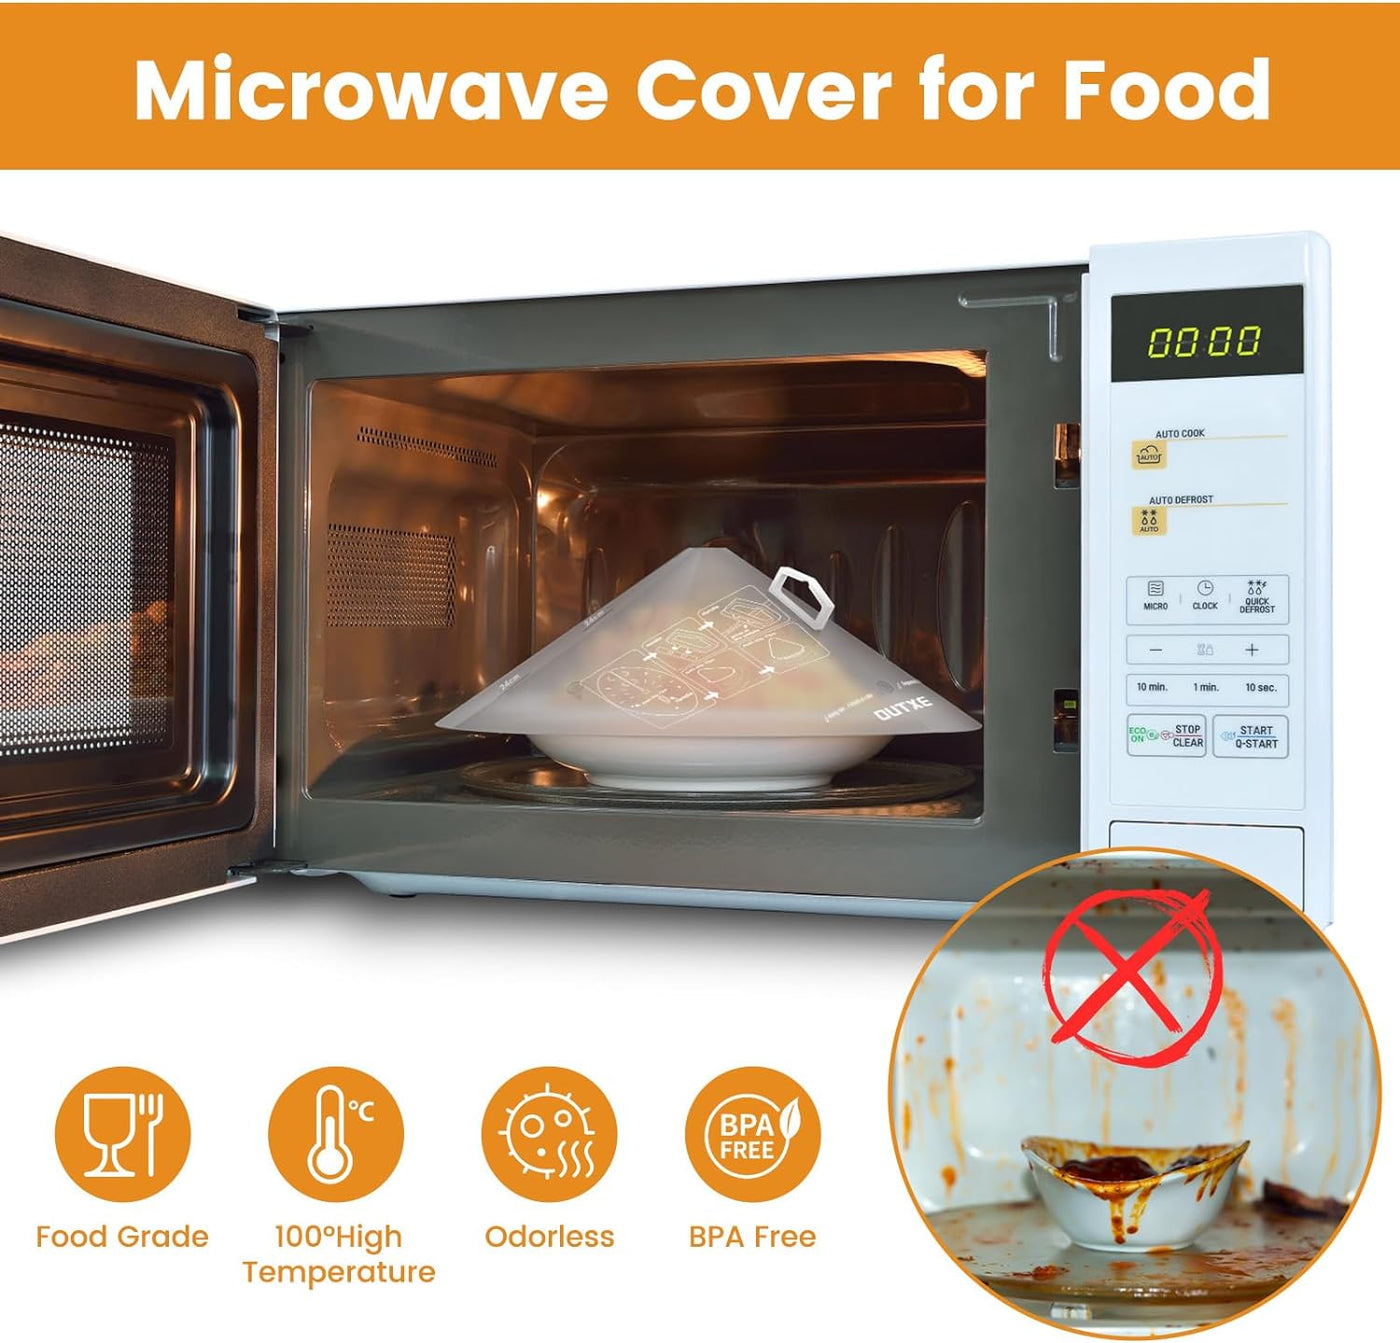 OUTXE 2-Pack Microwave Splatter Cover Vented for Food, Adjustable Plastic Microwave Plate Cover with Handle, 6-inch 9-inch 10-inch Small Microwave Lid, BPA-Free, Clear